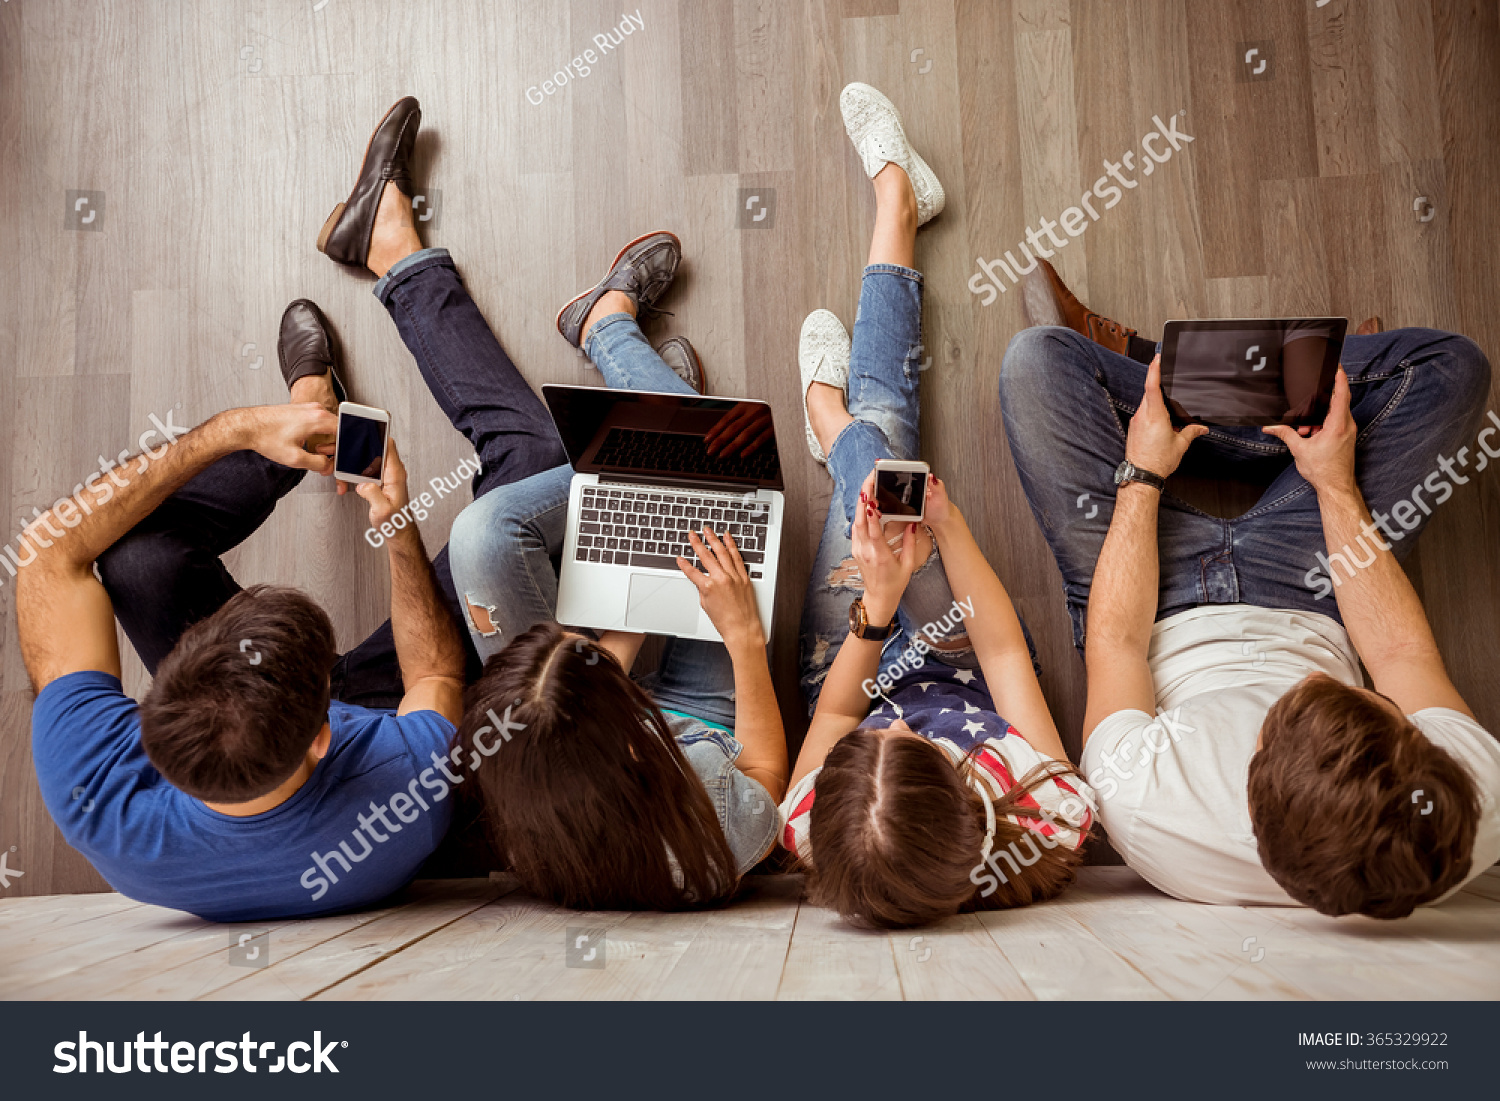 Group of attractive young people sitting on the floor using a laptop, Tablet PC, smart phones, headphones listening to music, smiling #365329922